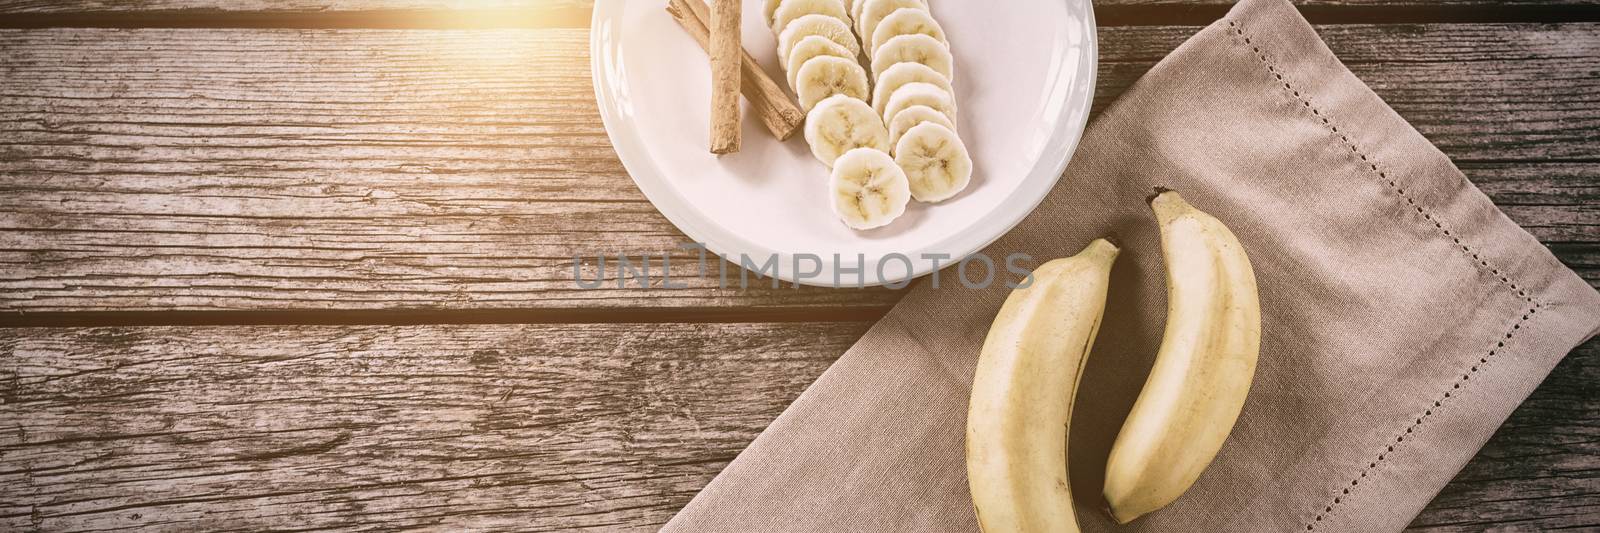 Banana and slices of banana with cinnamon stick in plate on wooden table by Wavebreakmedia